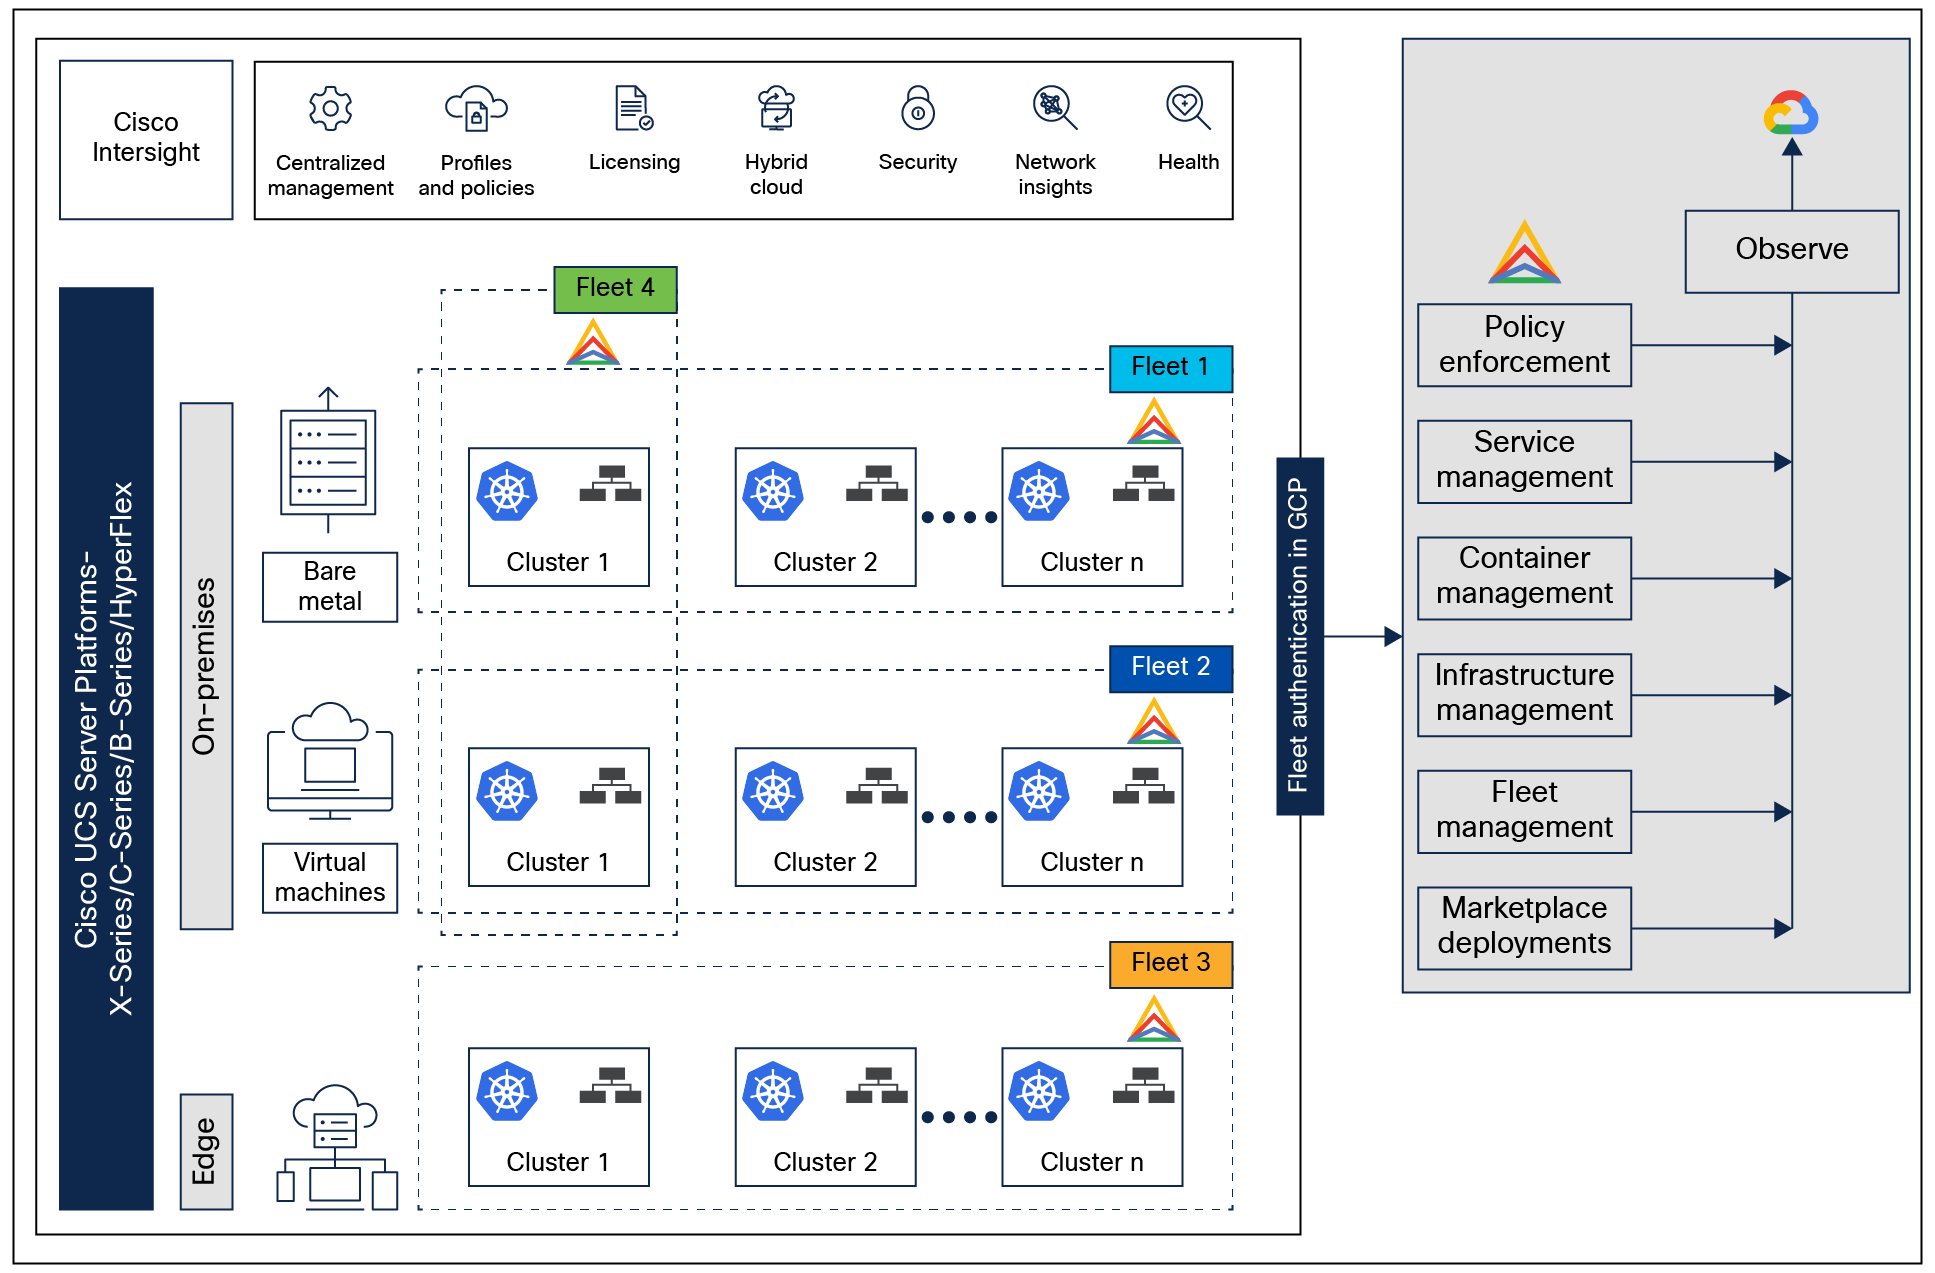 Fleet management at both Infrastructure and Kubernetes layers